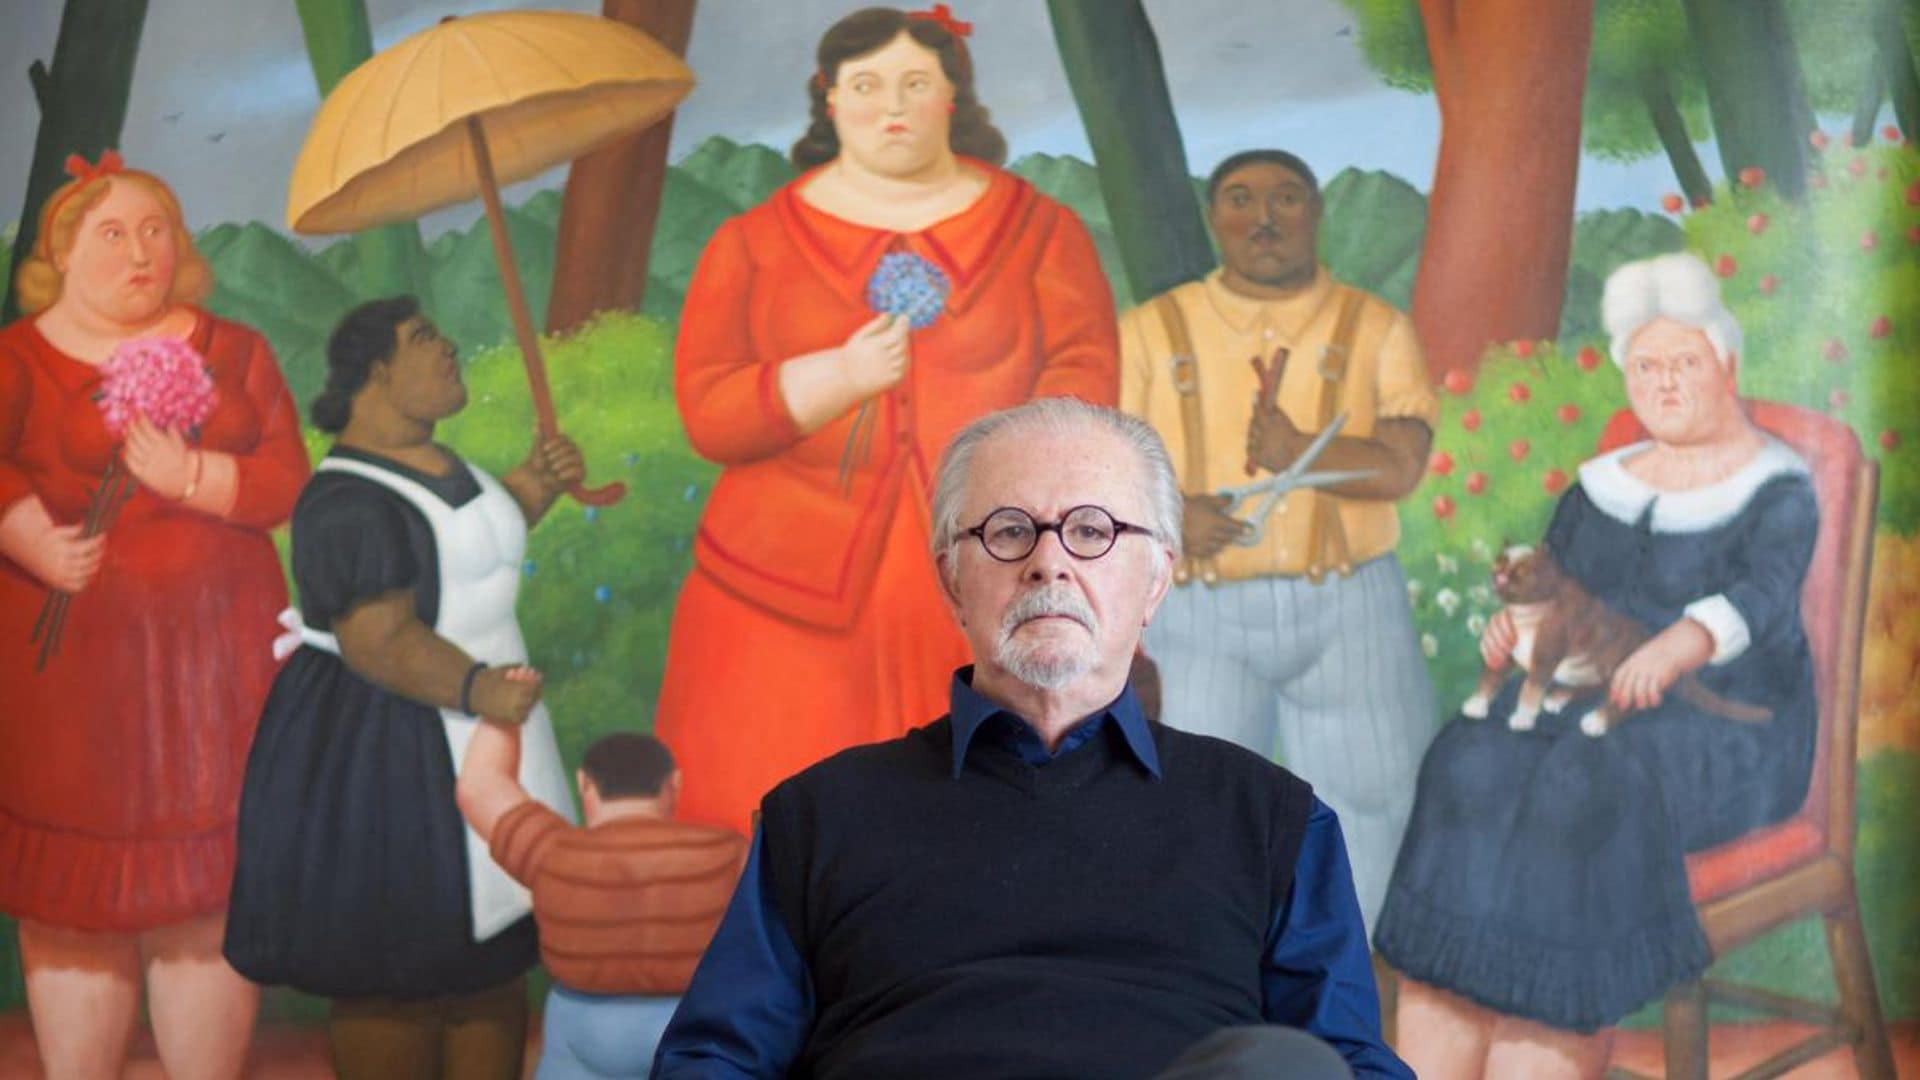 Fernando Botero passed away at 91 in his home in the Principality of Monaco